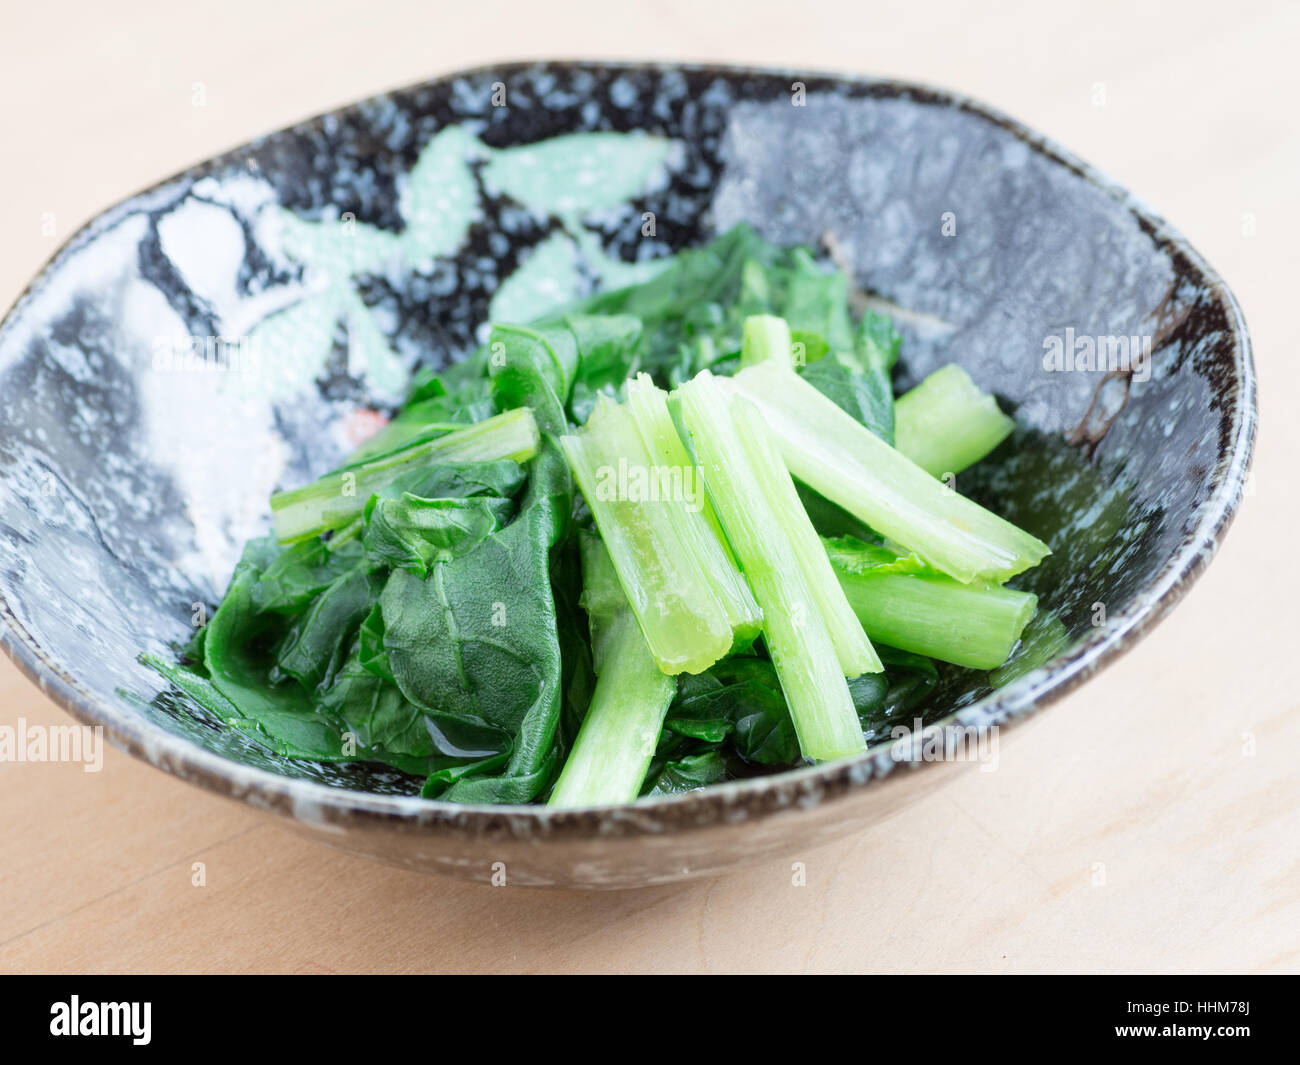 Japanese cuisine, boiled spinach in the bowl Stock Photo